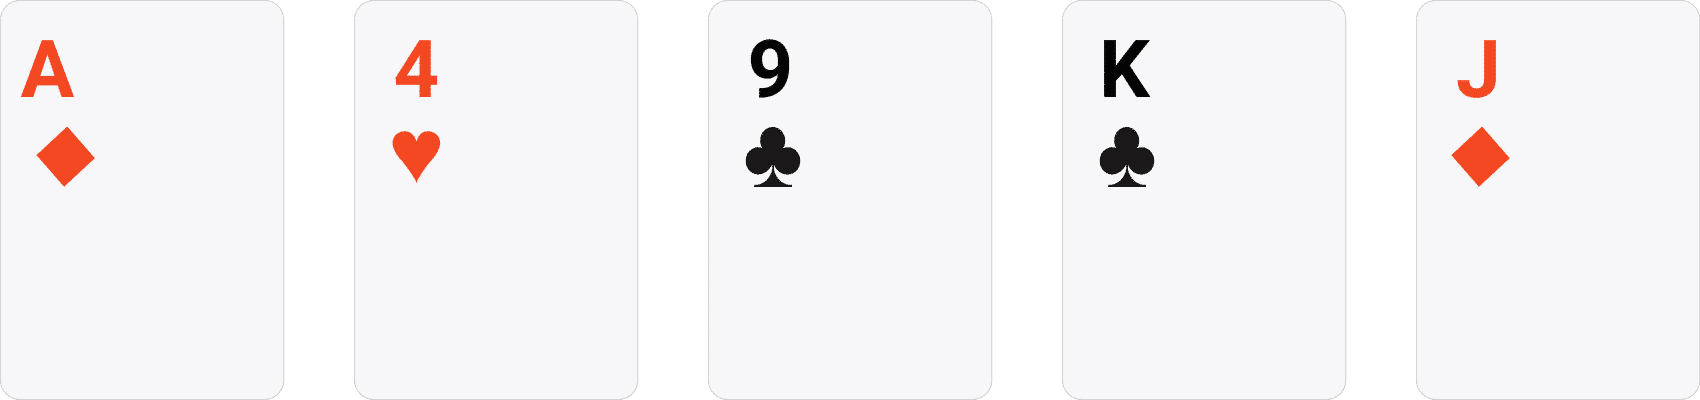 High Card poker example